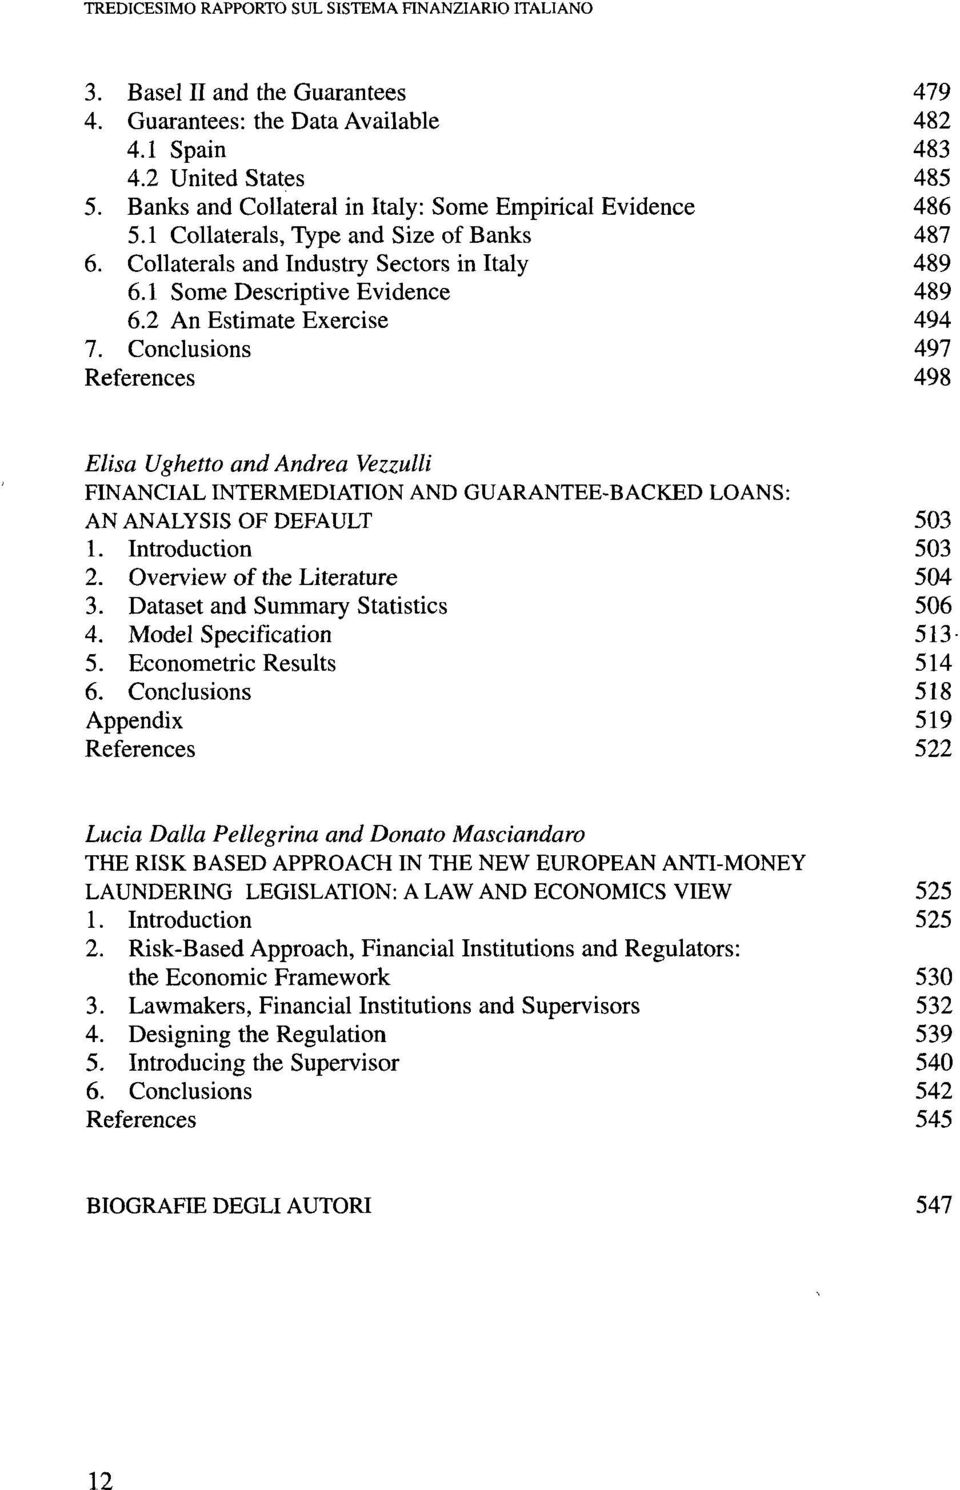 2 An Estimate Exercise 494 7. Conclusions 497 References 498 Elisa Ughetto and Andrea Vezzulli FINANCIAL INTERMEDIATION AND GUARANTEE-BACKED LOANS: AN ANALYSIS OF DEFAULT 503 1. Introduction 503 2.